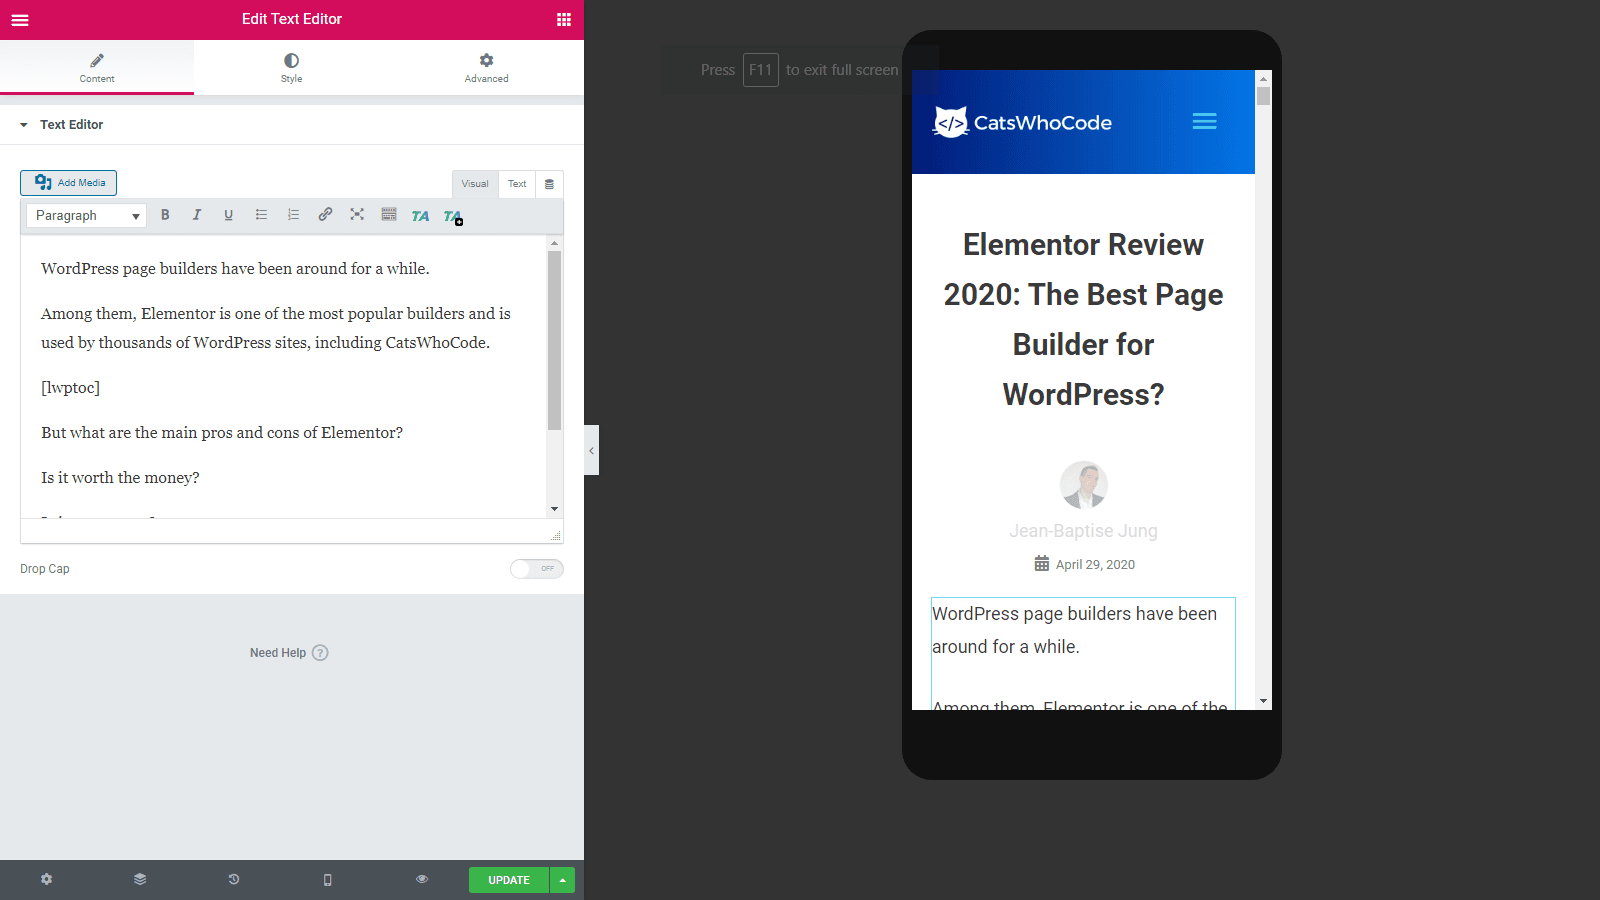 Elementor Review 2020: The Best Page Builder for WordPress? 2